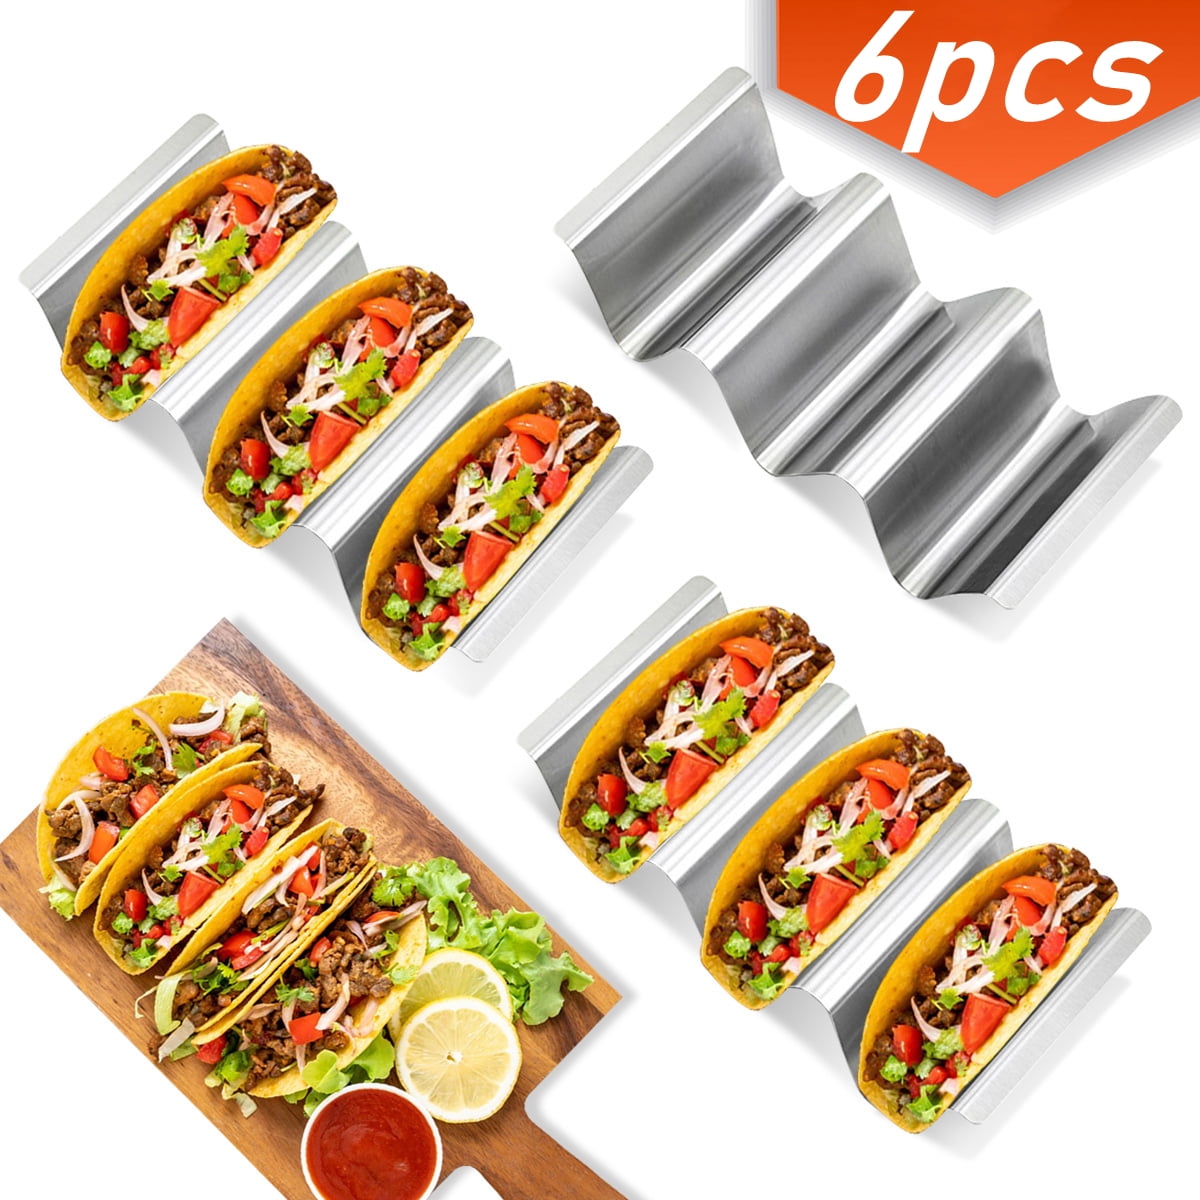 JIBOLAT Taco Holders set of 3,Stainless Steel Taco Shell Holder Stand,Taco  Tray Plates for Taco Bar Gifts Accessories,Holds 4 Tacos Each,Oven Safe for